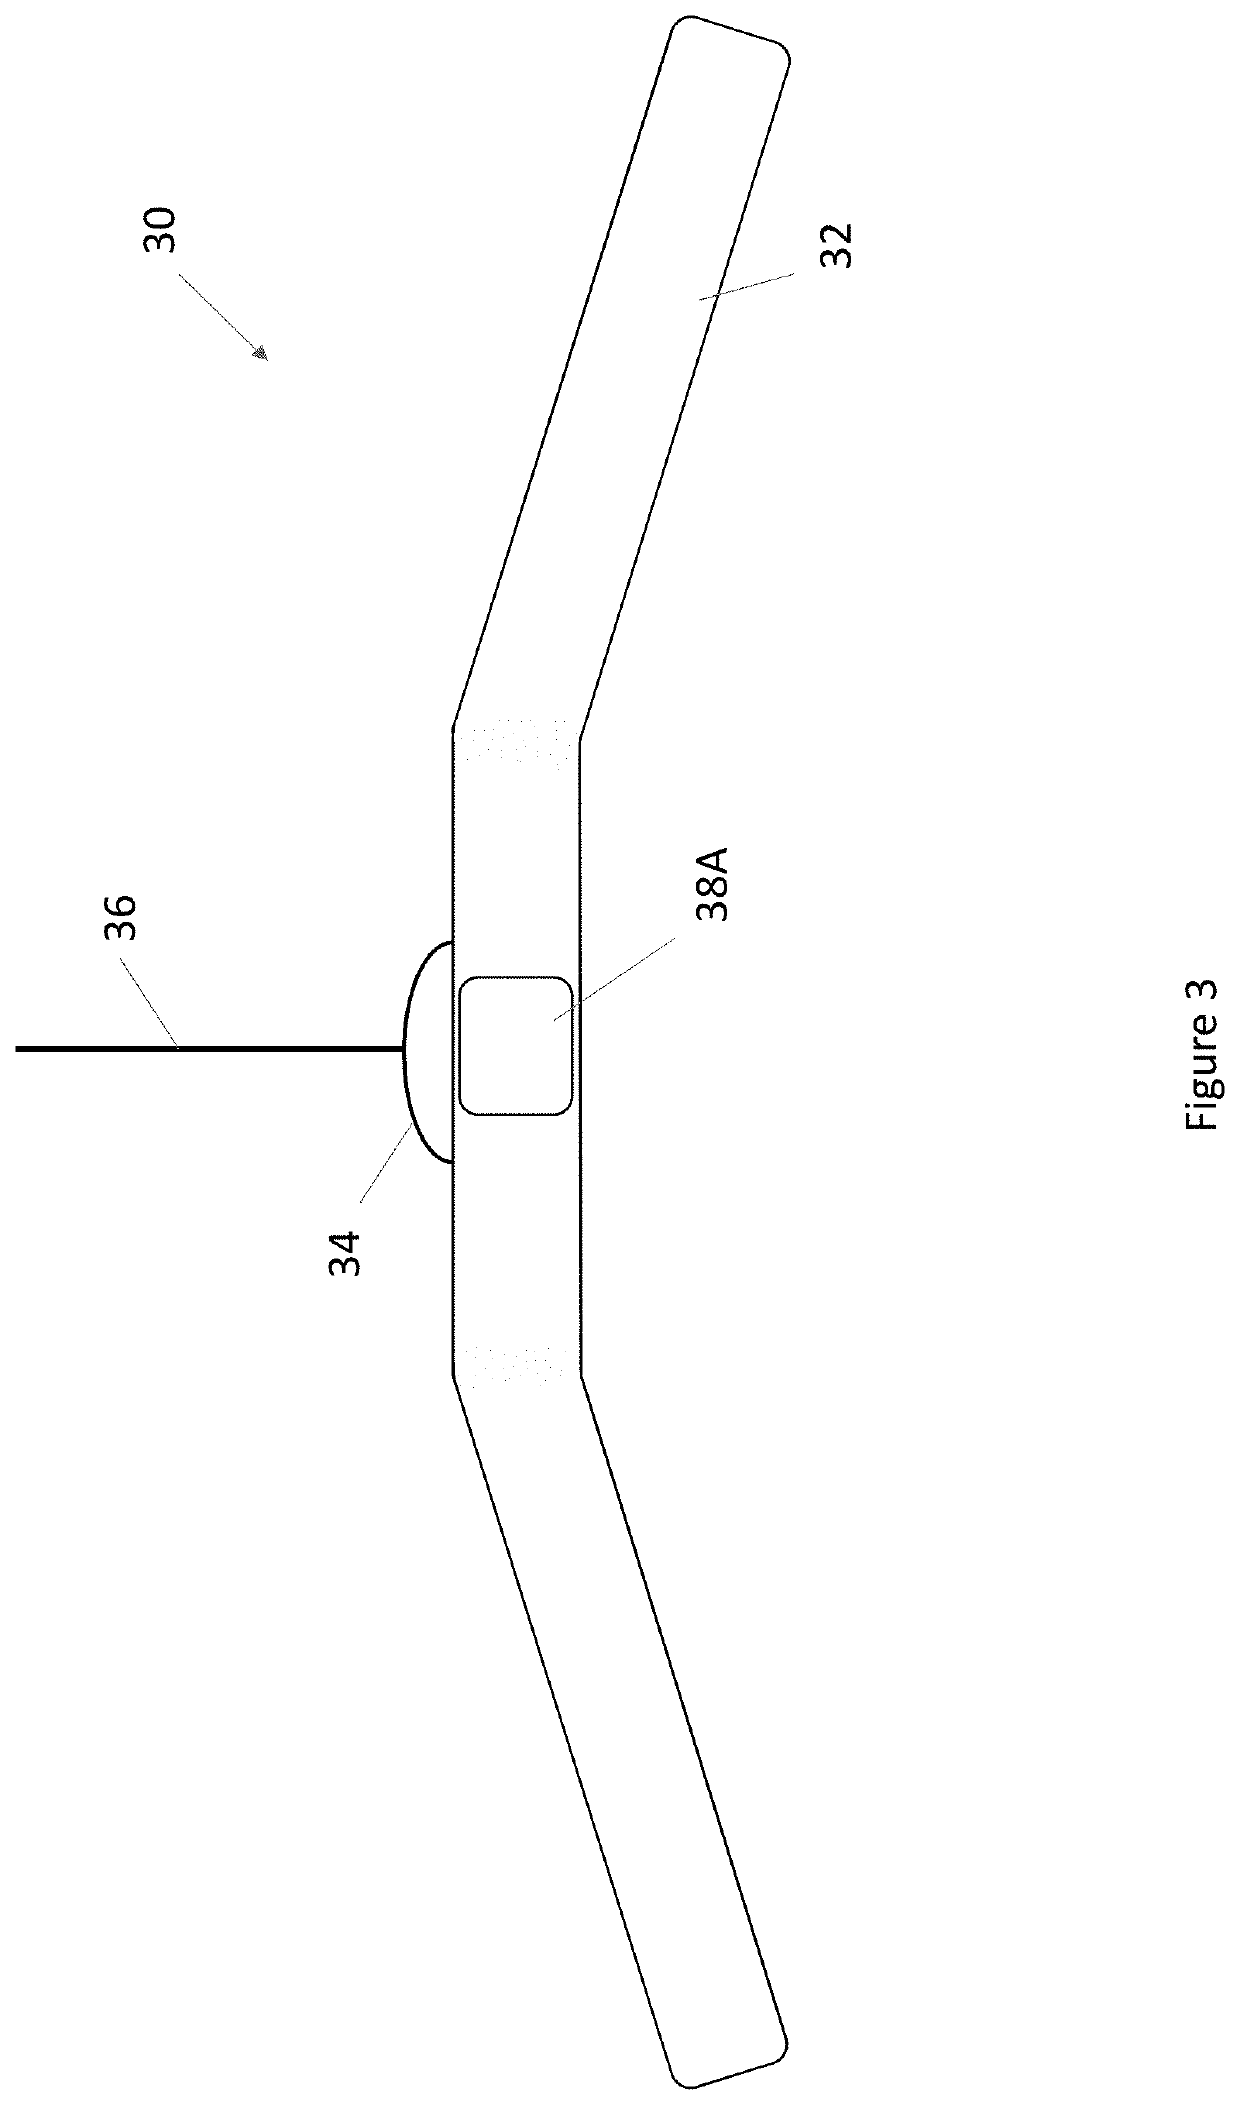 Rowing machine having a handle with a cursor control device for controlling a cursor at a graphical user interface